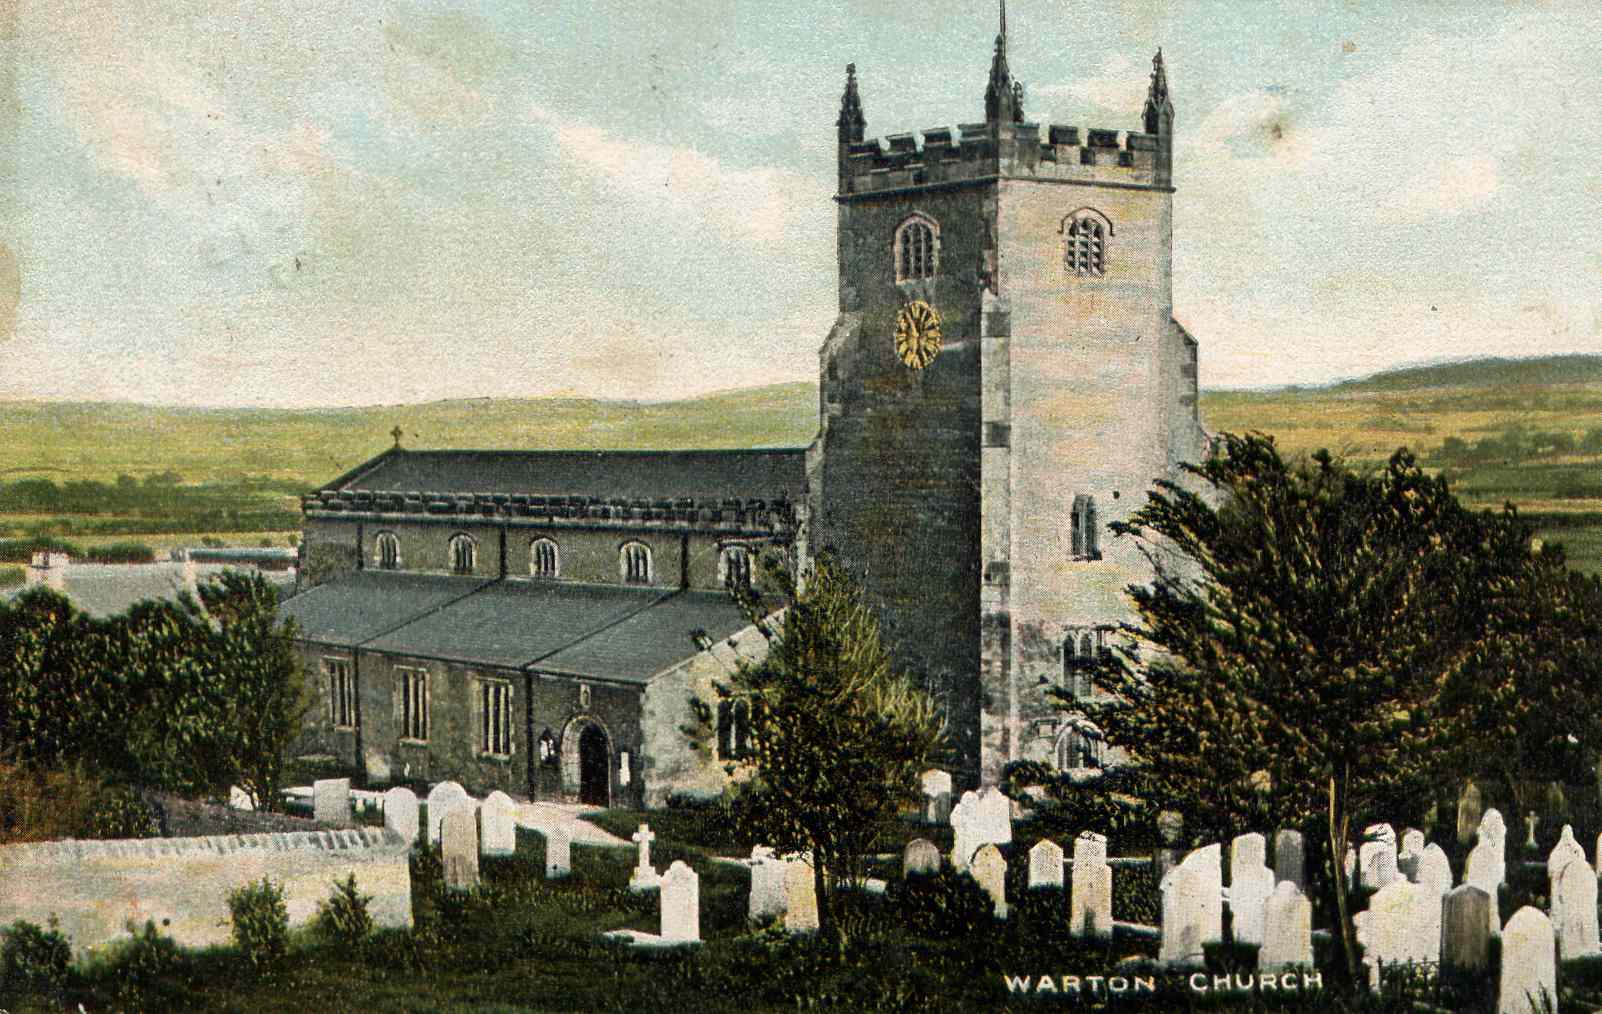 The Parish Church, from an old post card